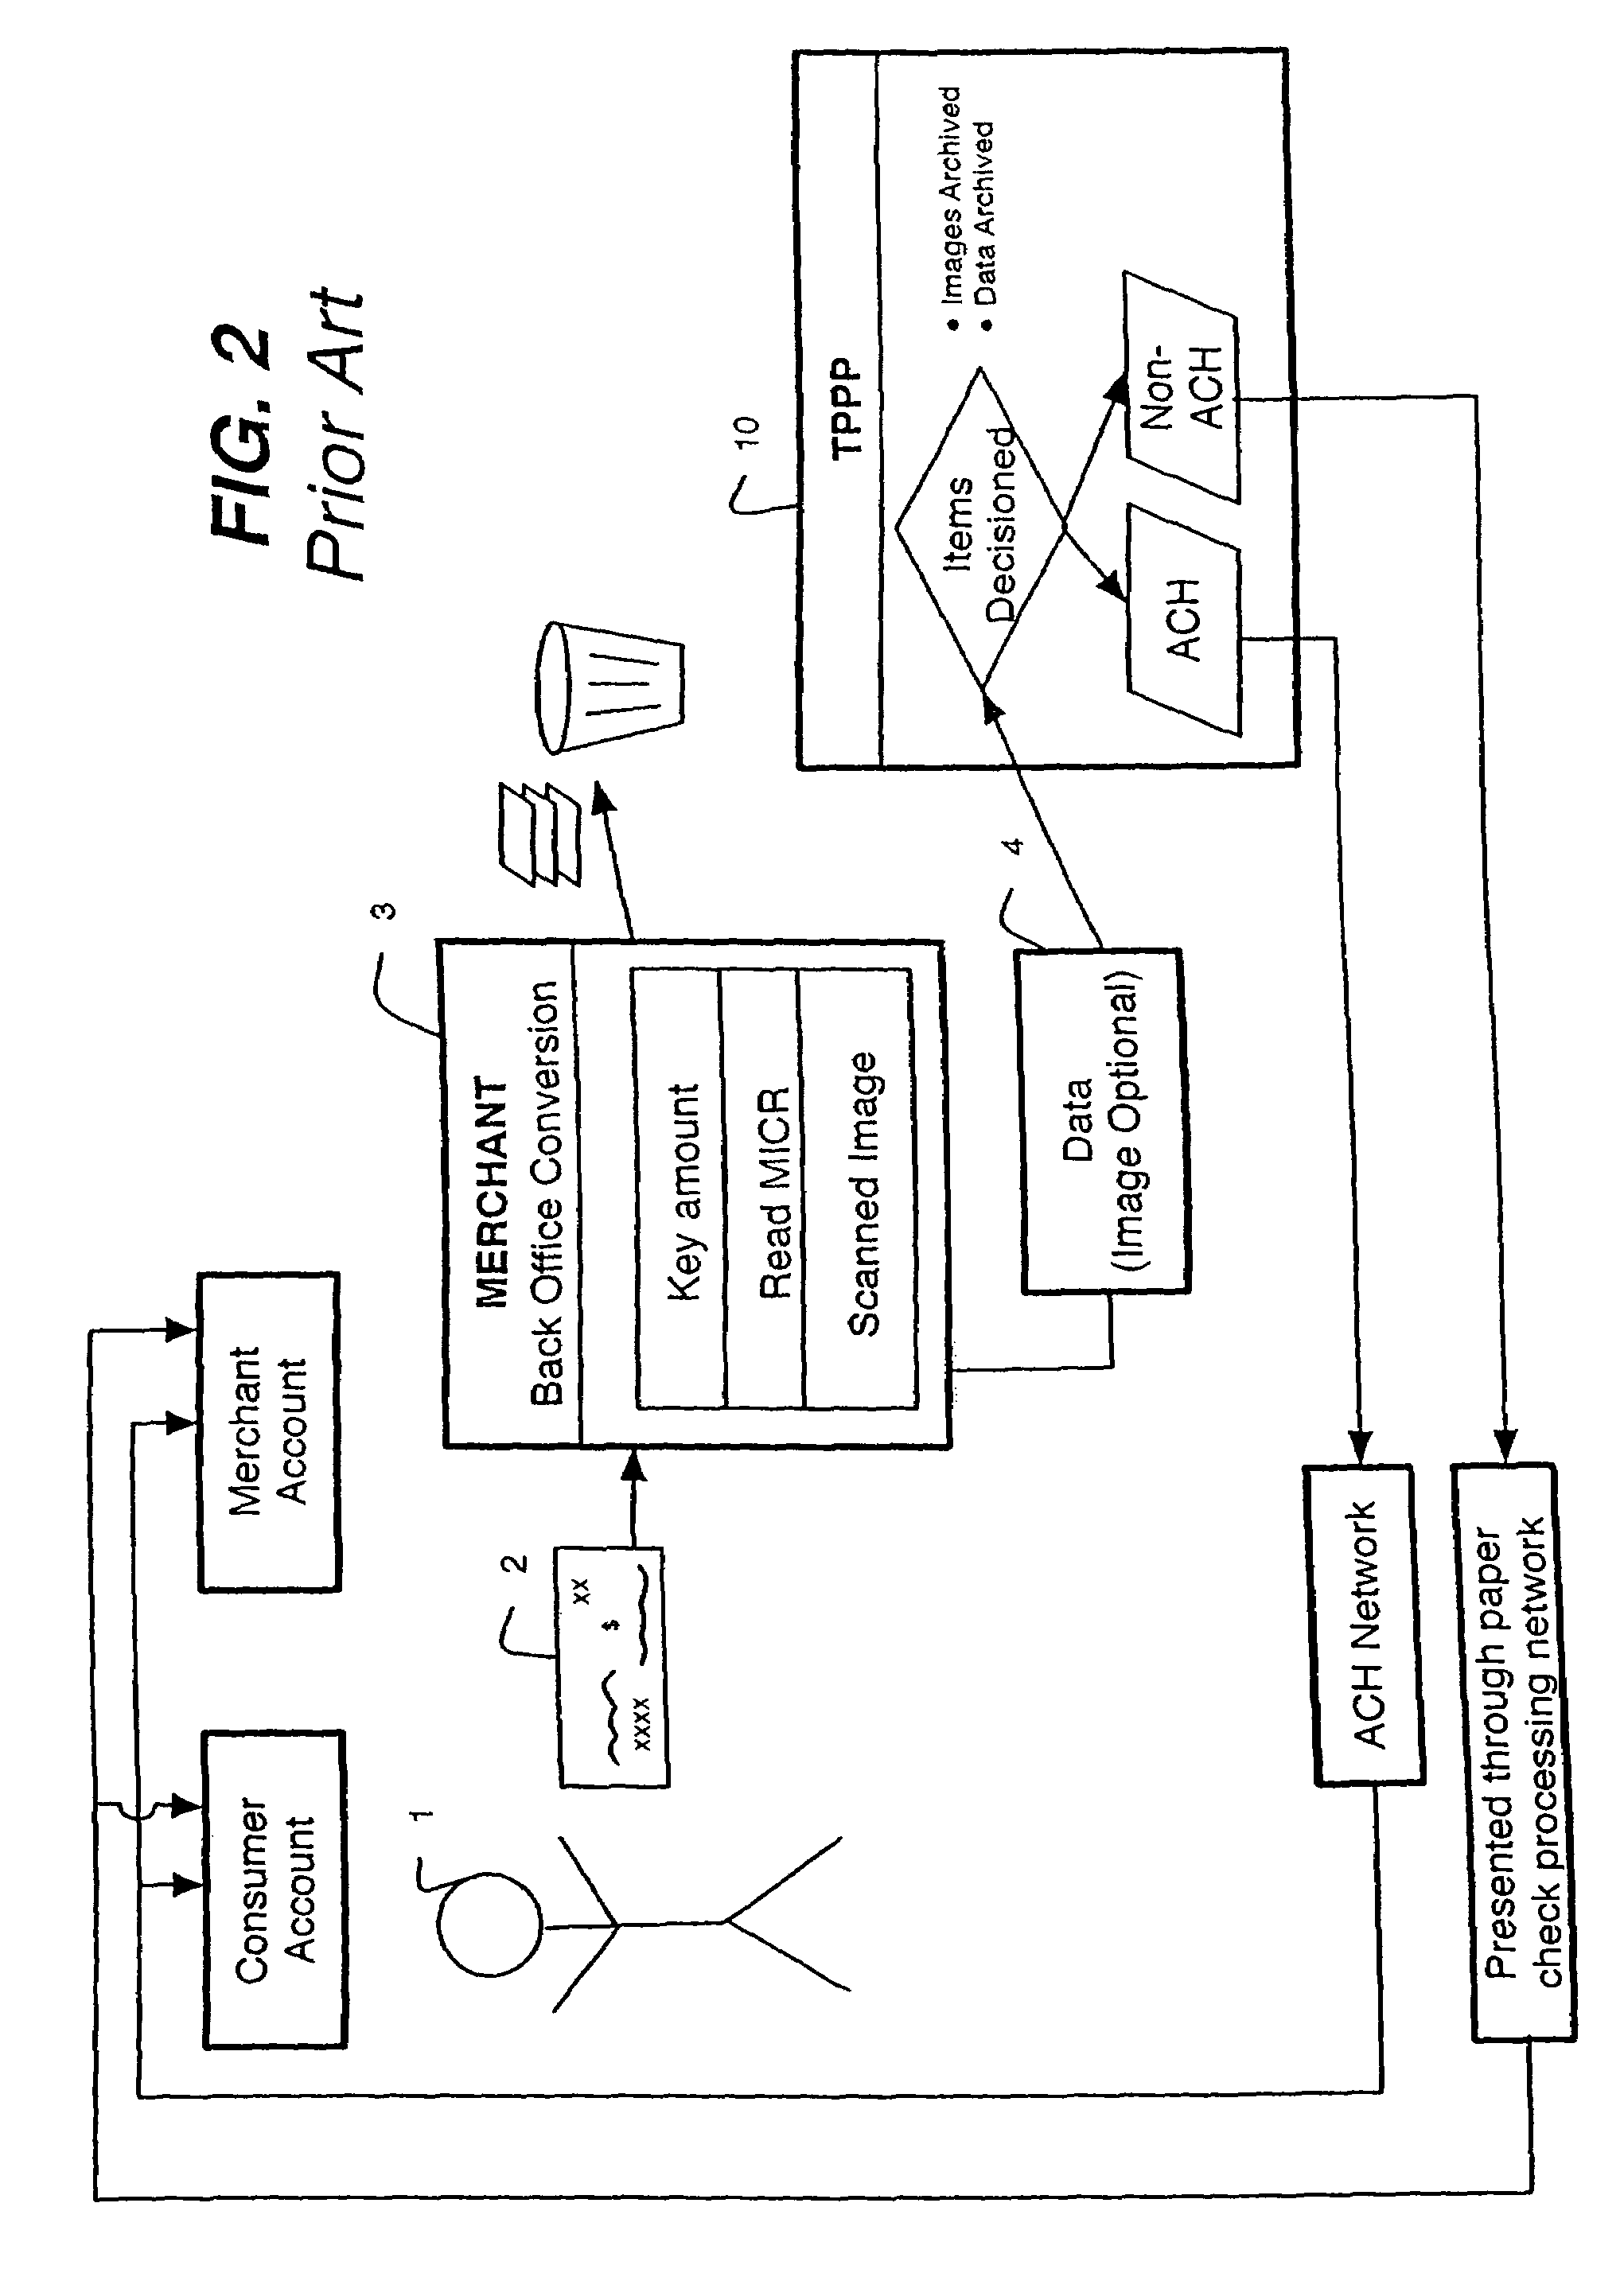 System and method for processing checks and check transactions with thresholds for adjustments to ACH transactions